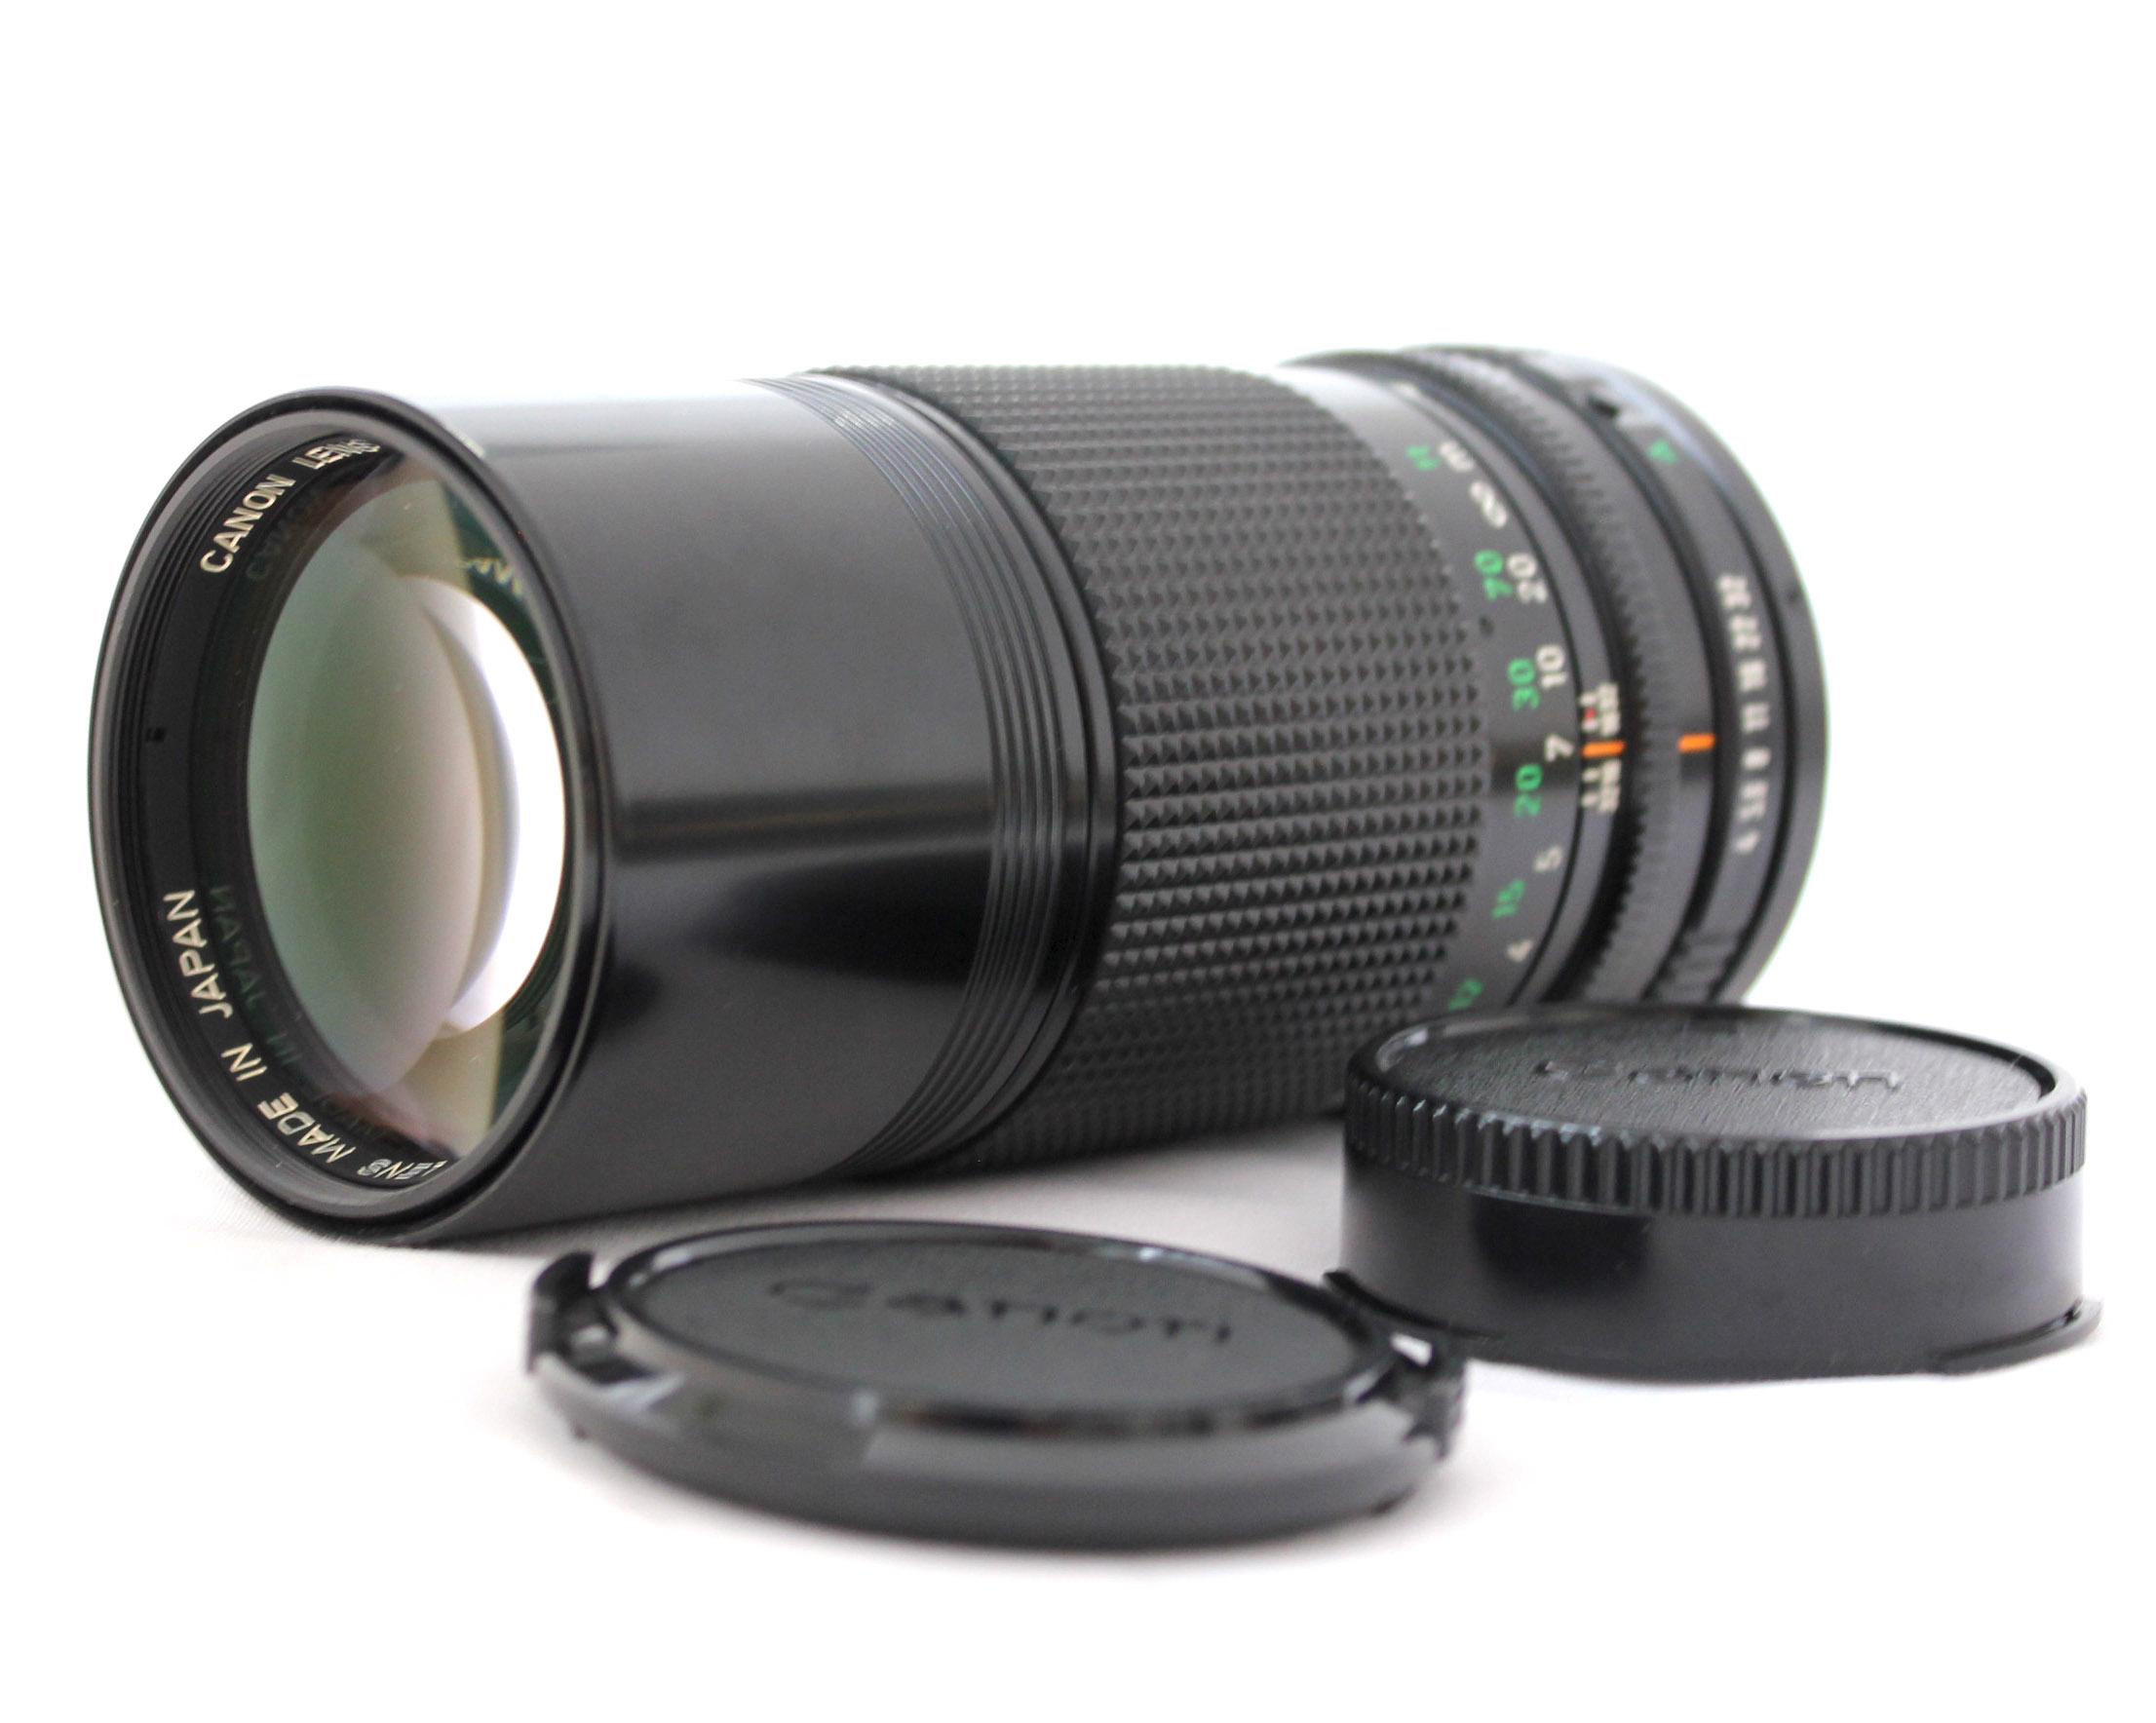 Japan Used Camera Shop | [Near Mint] Canon New FD NFD 200mm F/4 Telephoto MF Lens from Japan